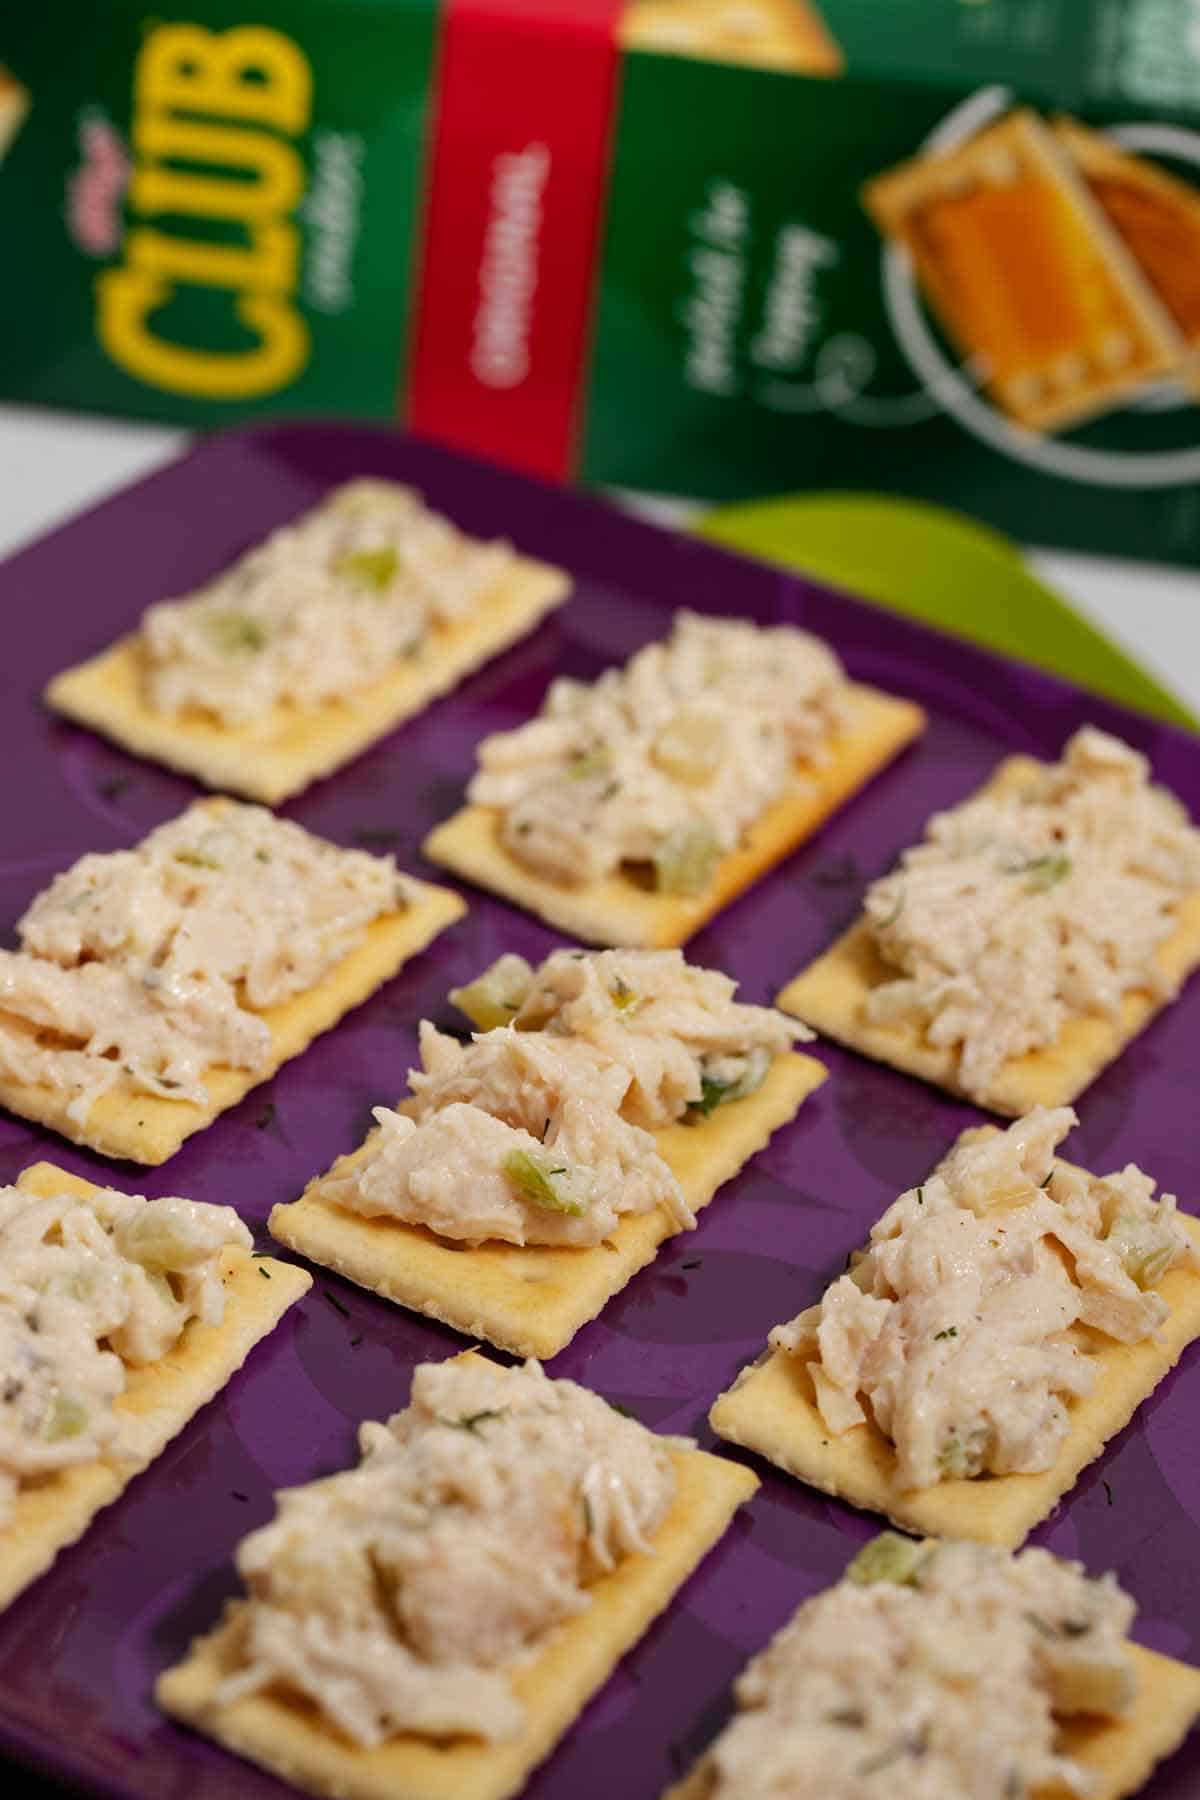 Club chicken salad cracker appetizers on a serving plate.